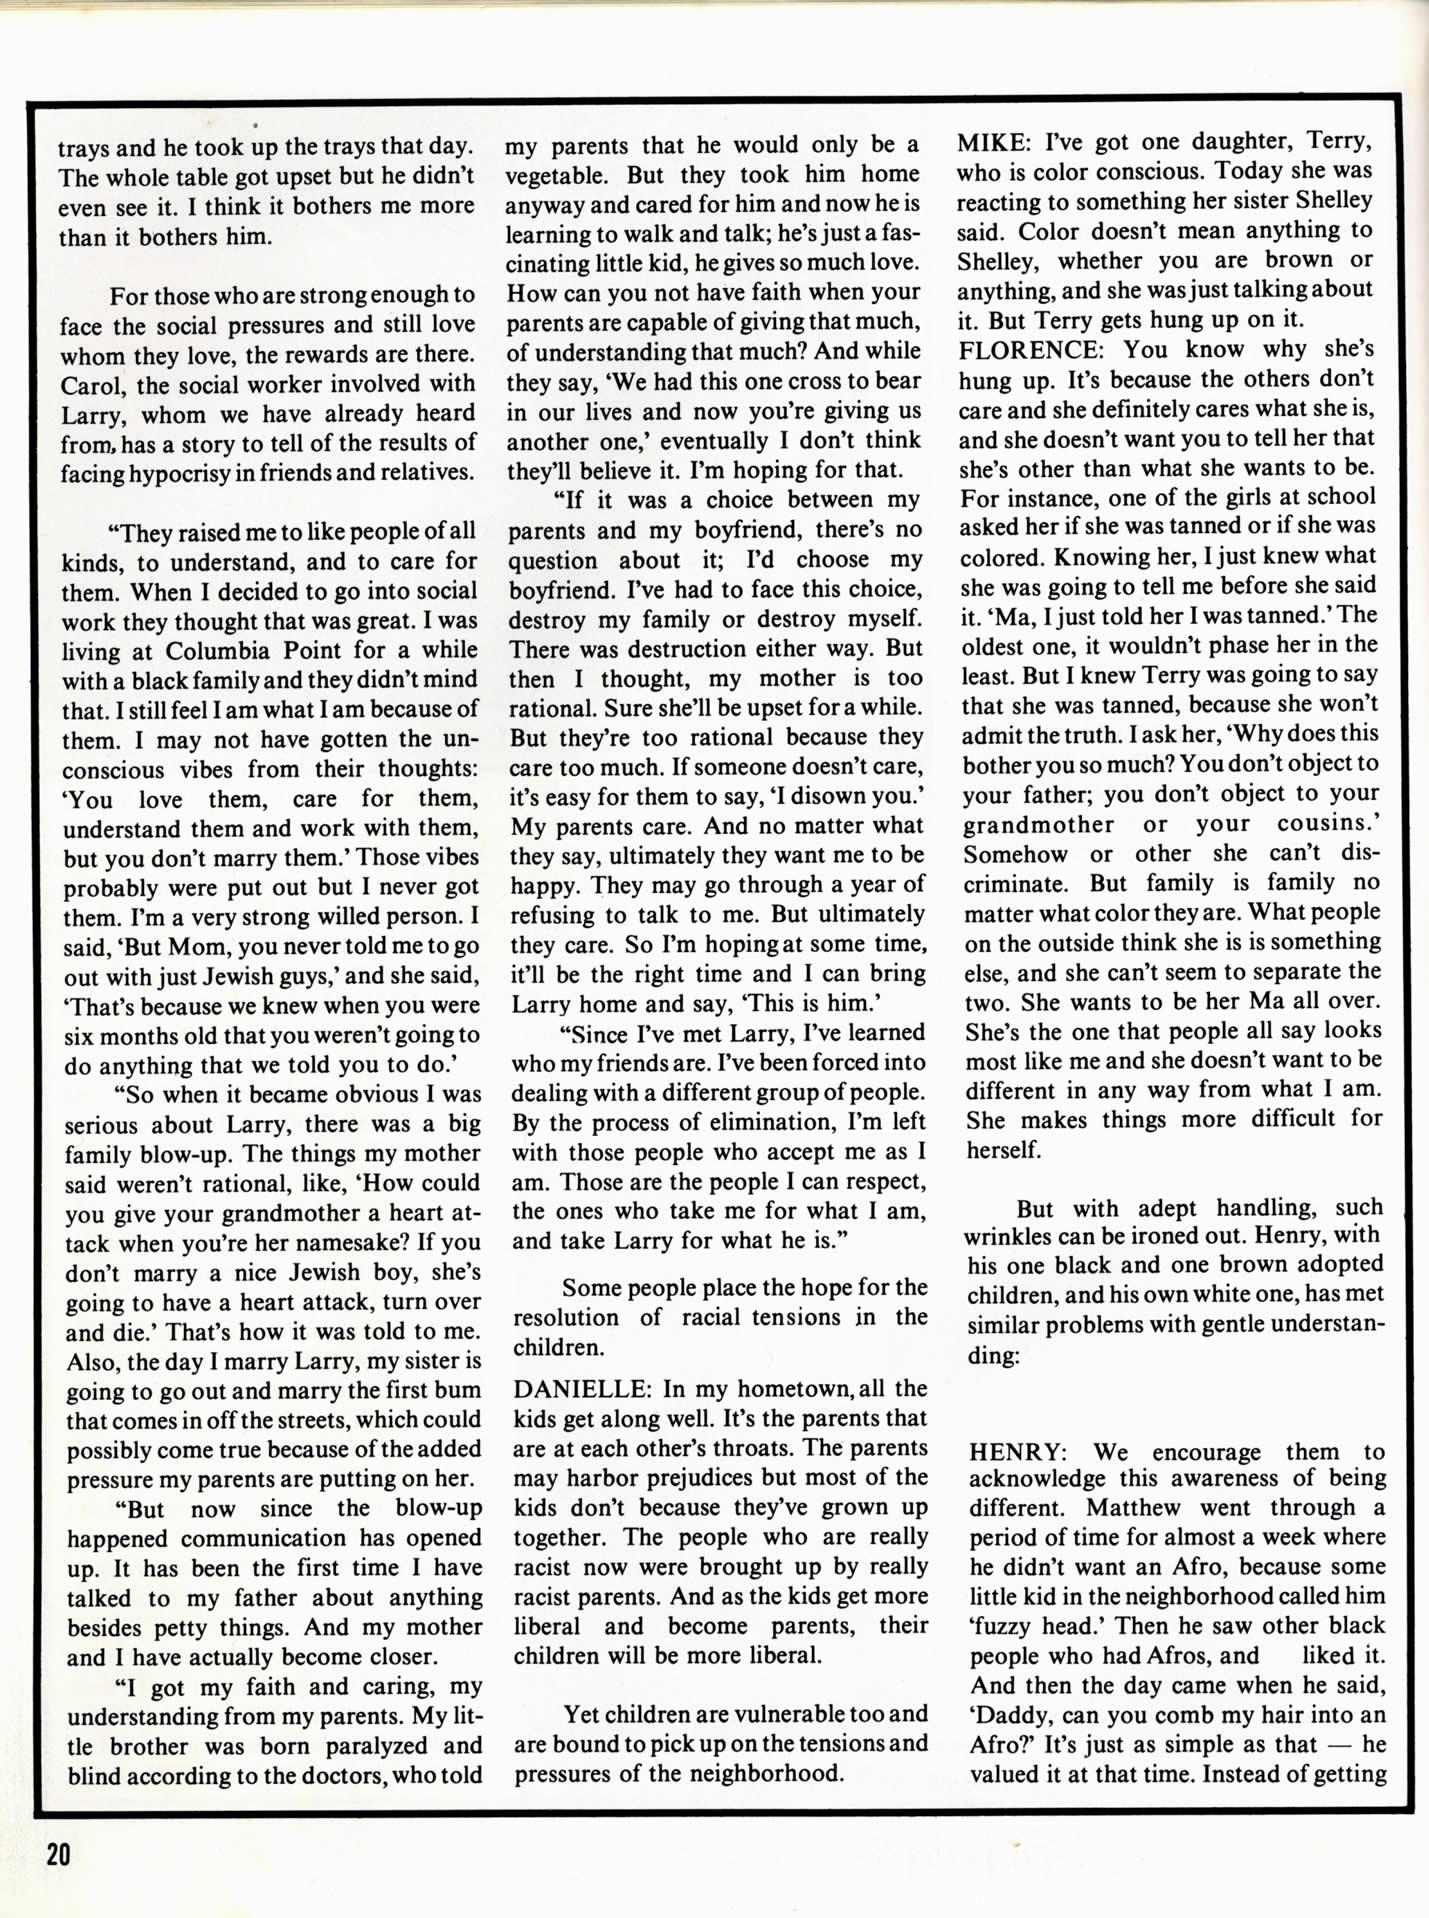 page20_Marriage_article_cont.jpg 478.7K